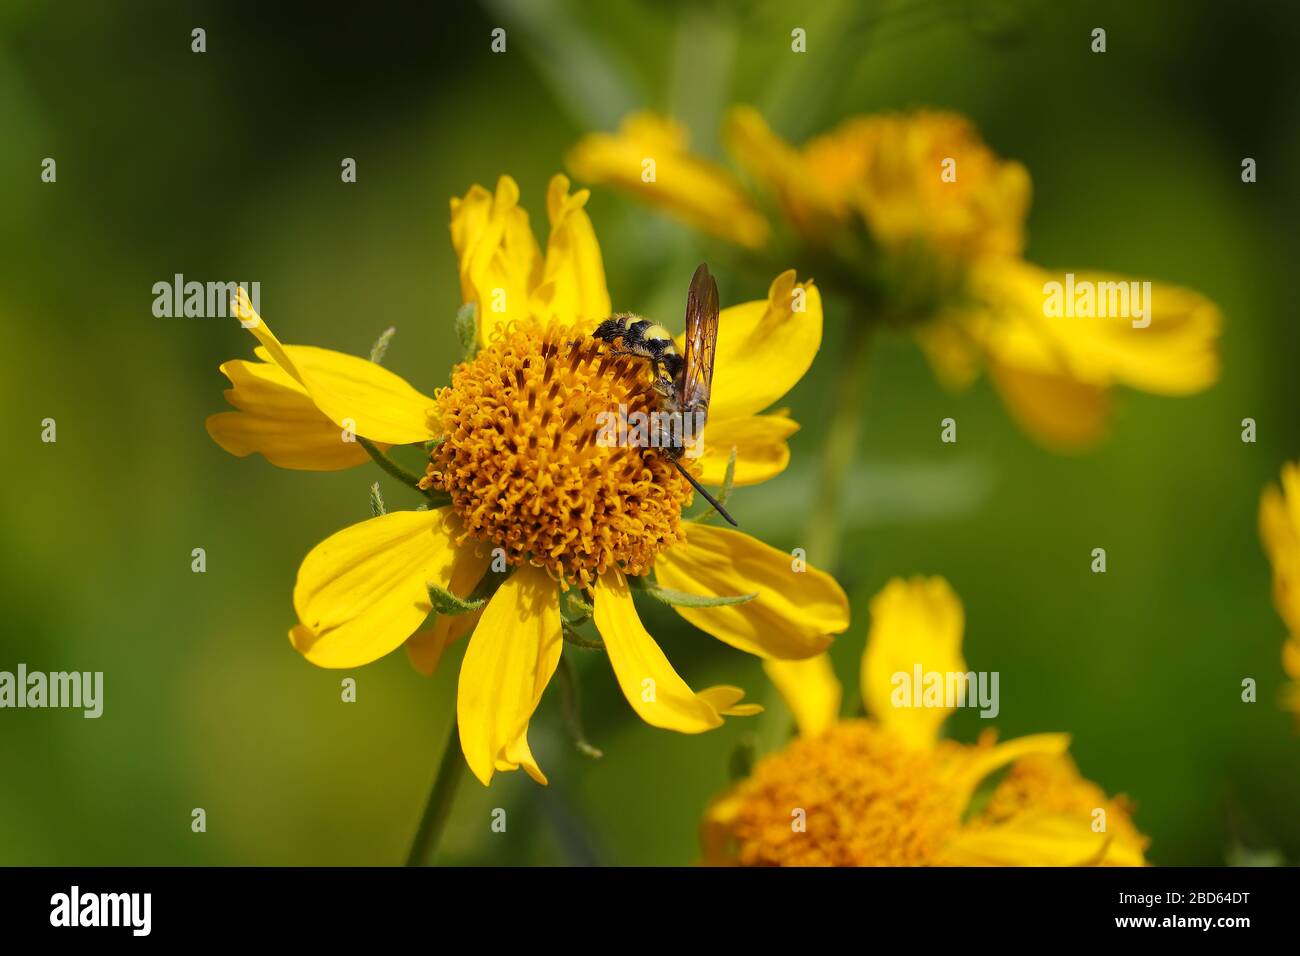 common wasp collecting yellow pollen on wild flower Stock Photo